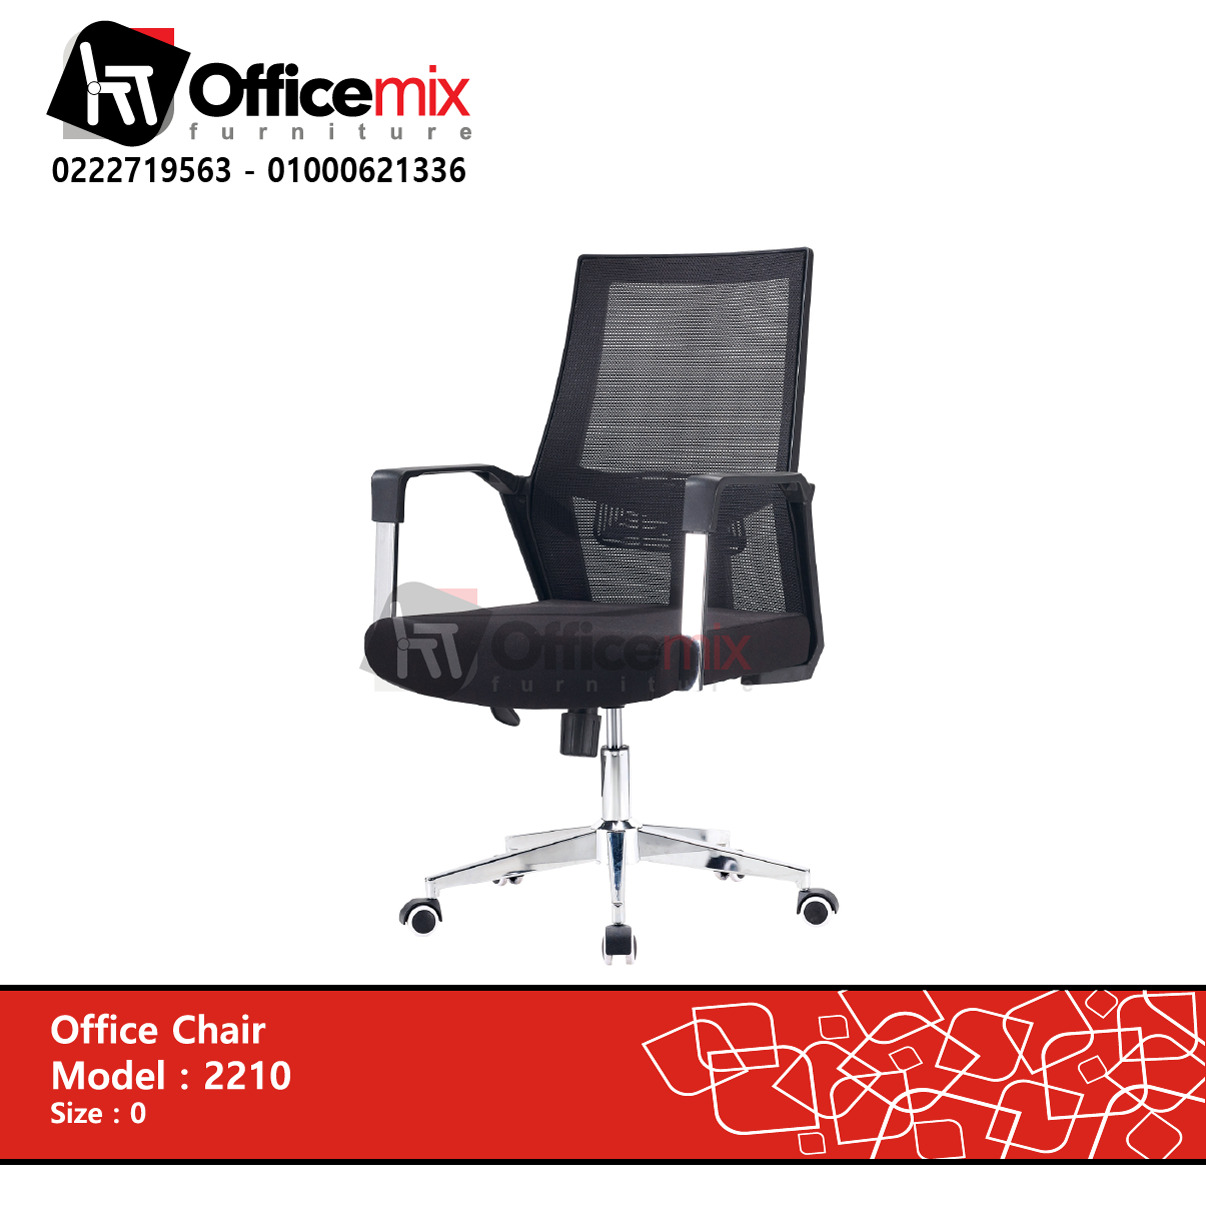 office mix manager chair 2210